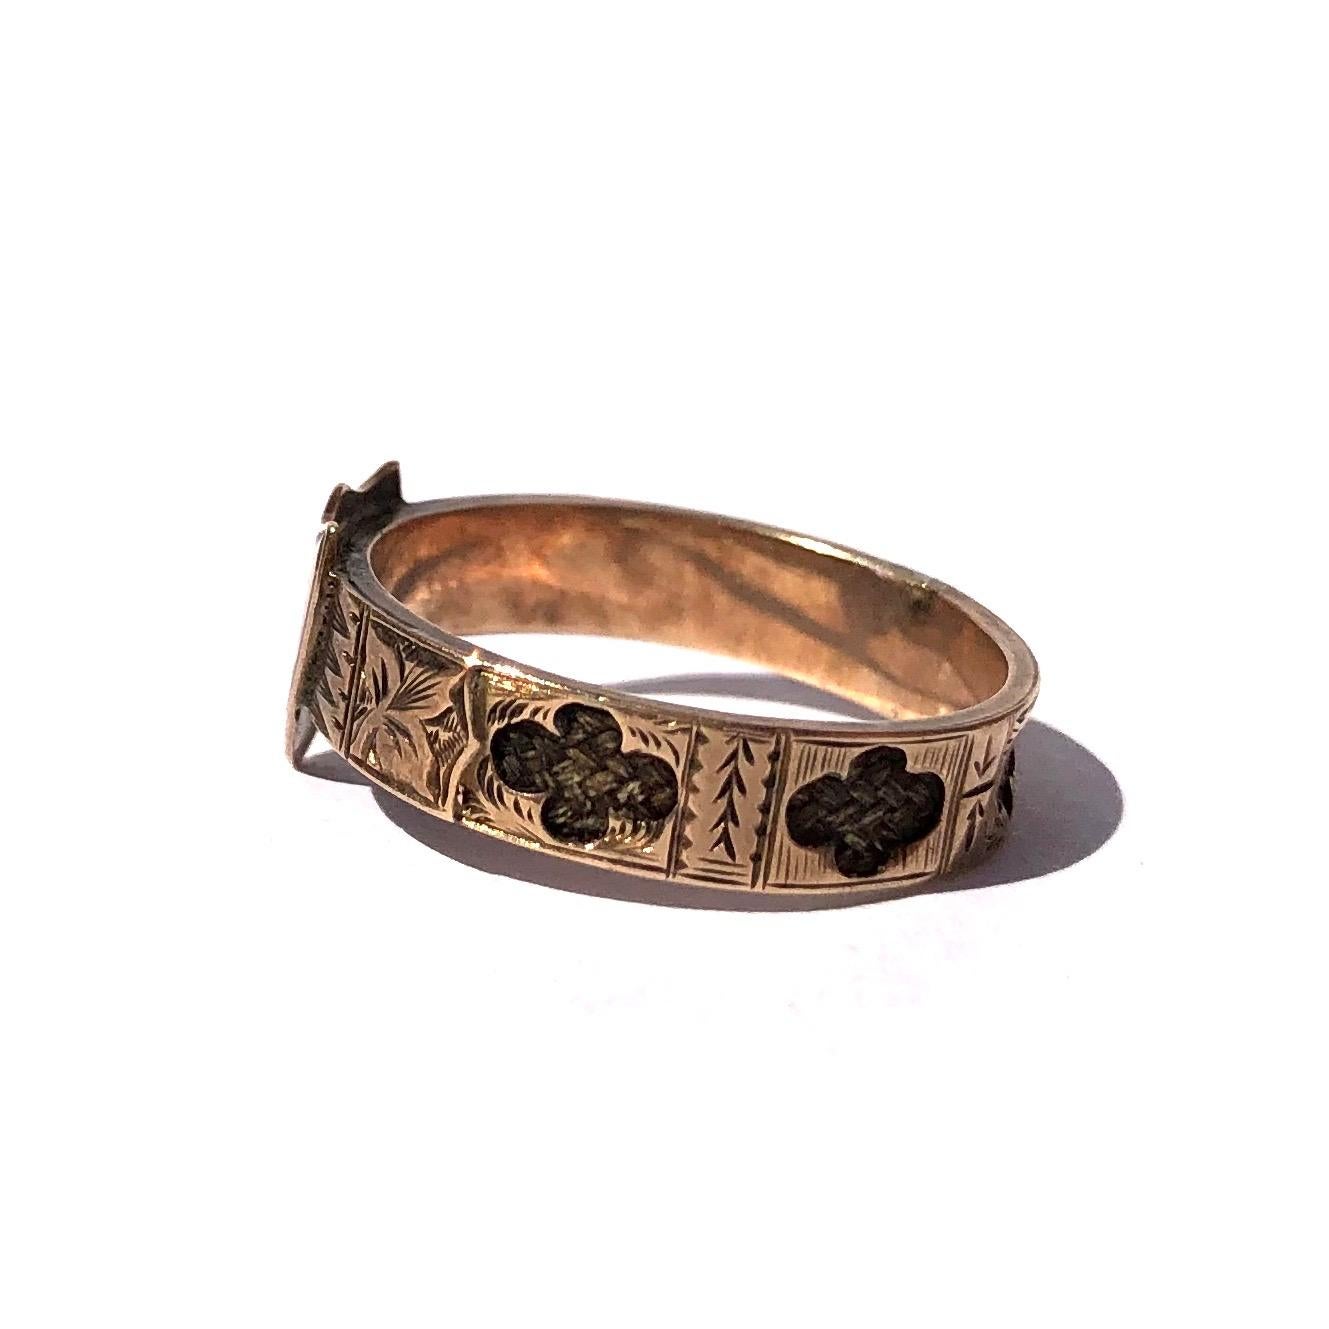 The shield at the front of this band has fancy initials finely engraved into it reading 'P.H.E'. The band itself is made up of panels with more gorgeous engraving all the way around and cut out panels revealing braided hair underneath. 

Ring Size: